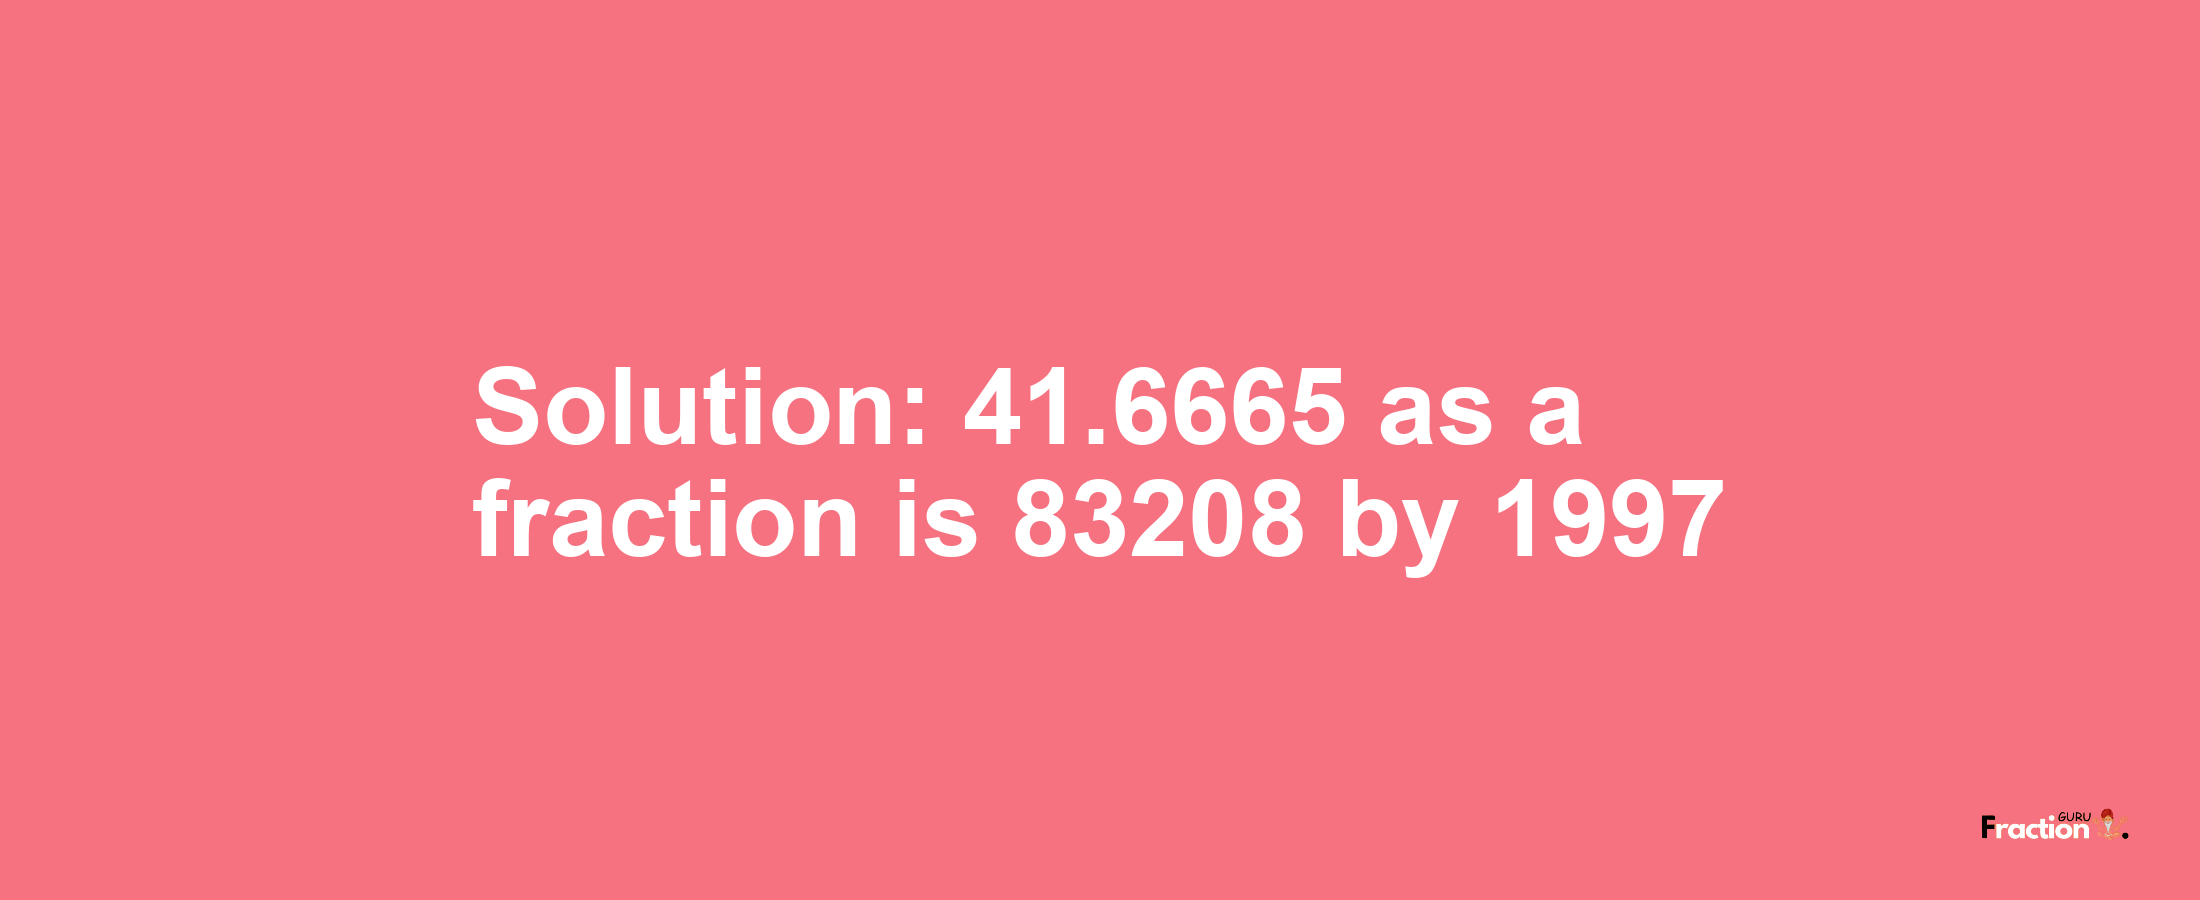 Solution:41.6665 as a fraction is 83208/1997